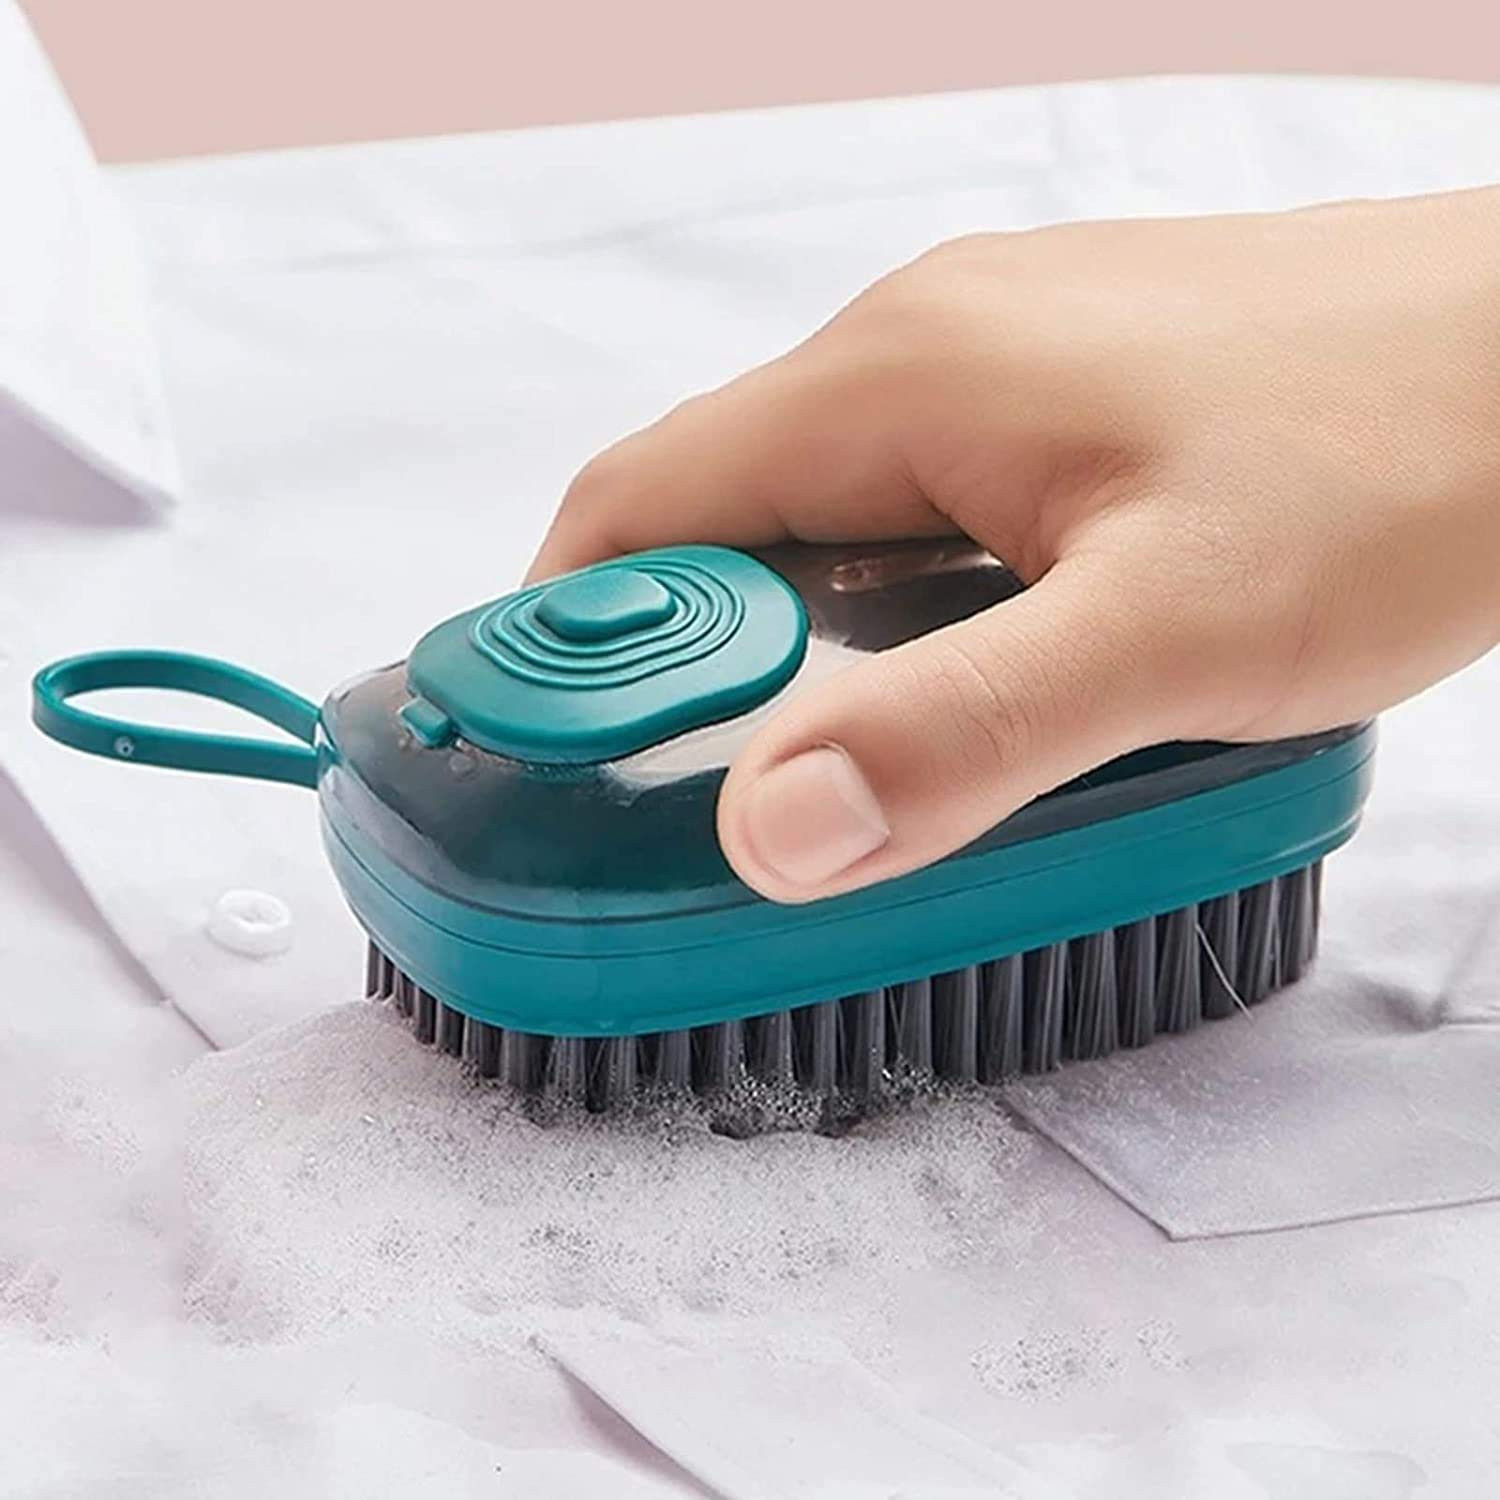 Liquid Adding Cleaner Brush, Cloth Cleaning Brush @ ₹ 199 Super Comfy Washing Cleaning, Laundry Clothes, Shoes Pot, Scrubbing Brush Multi color